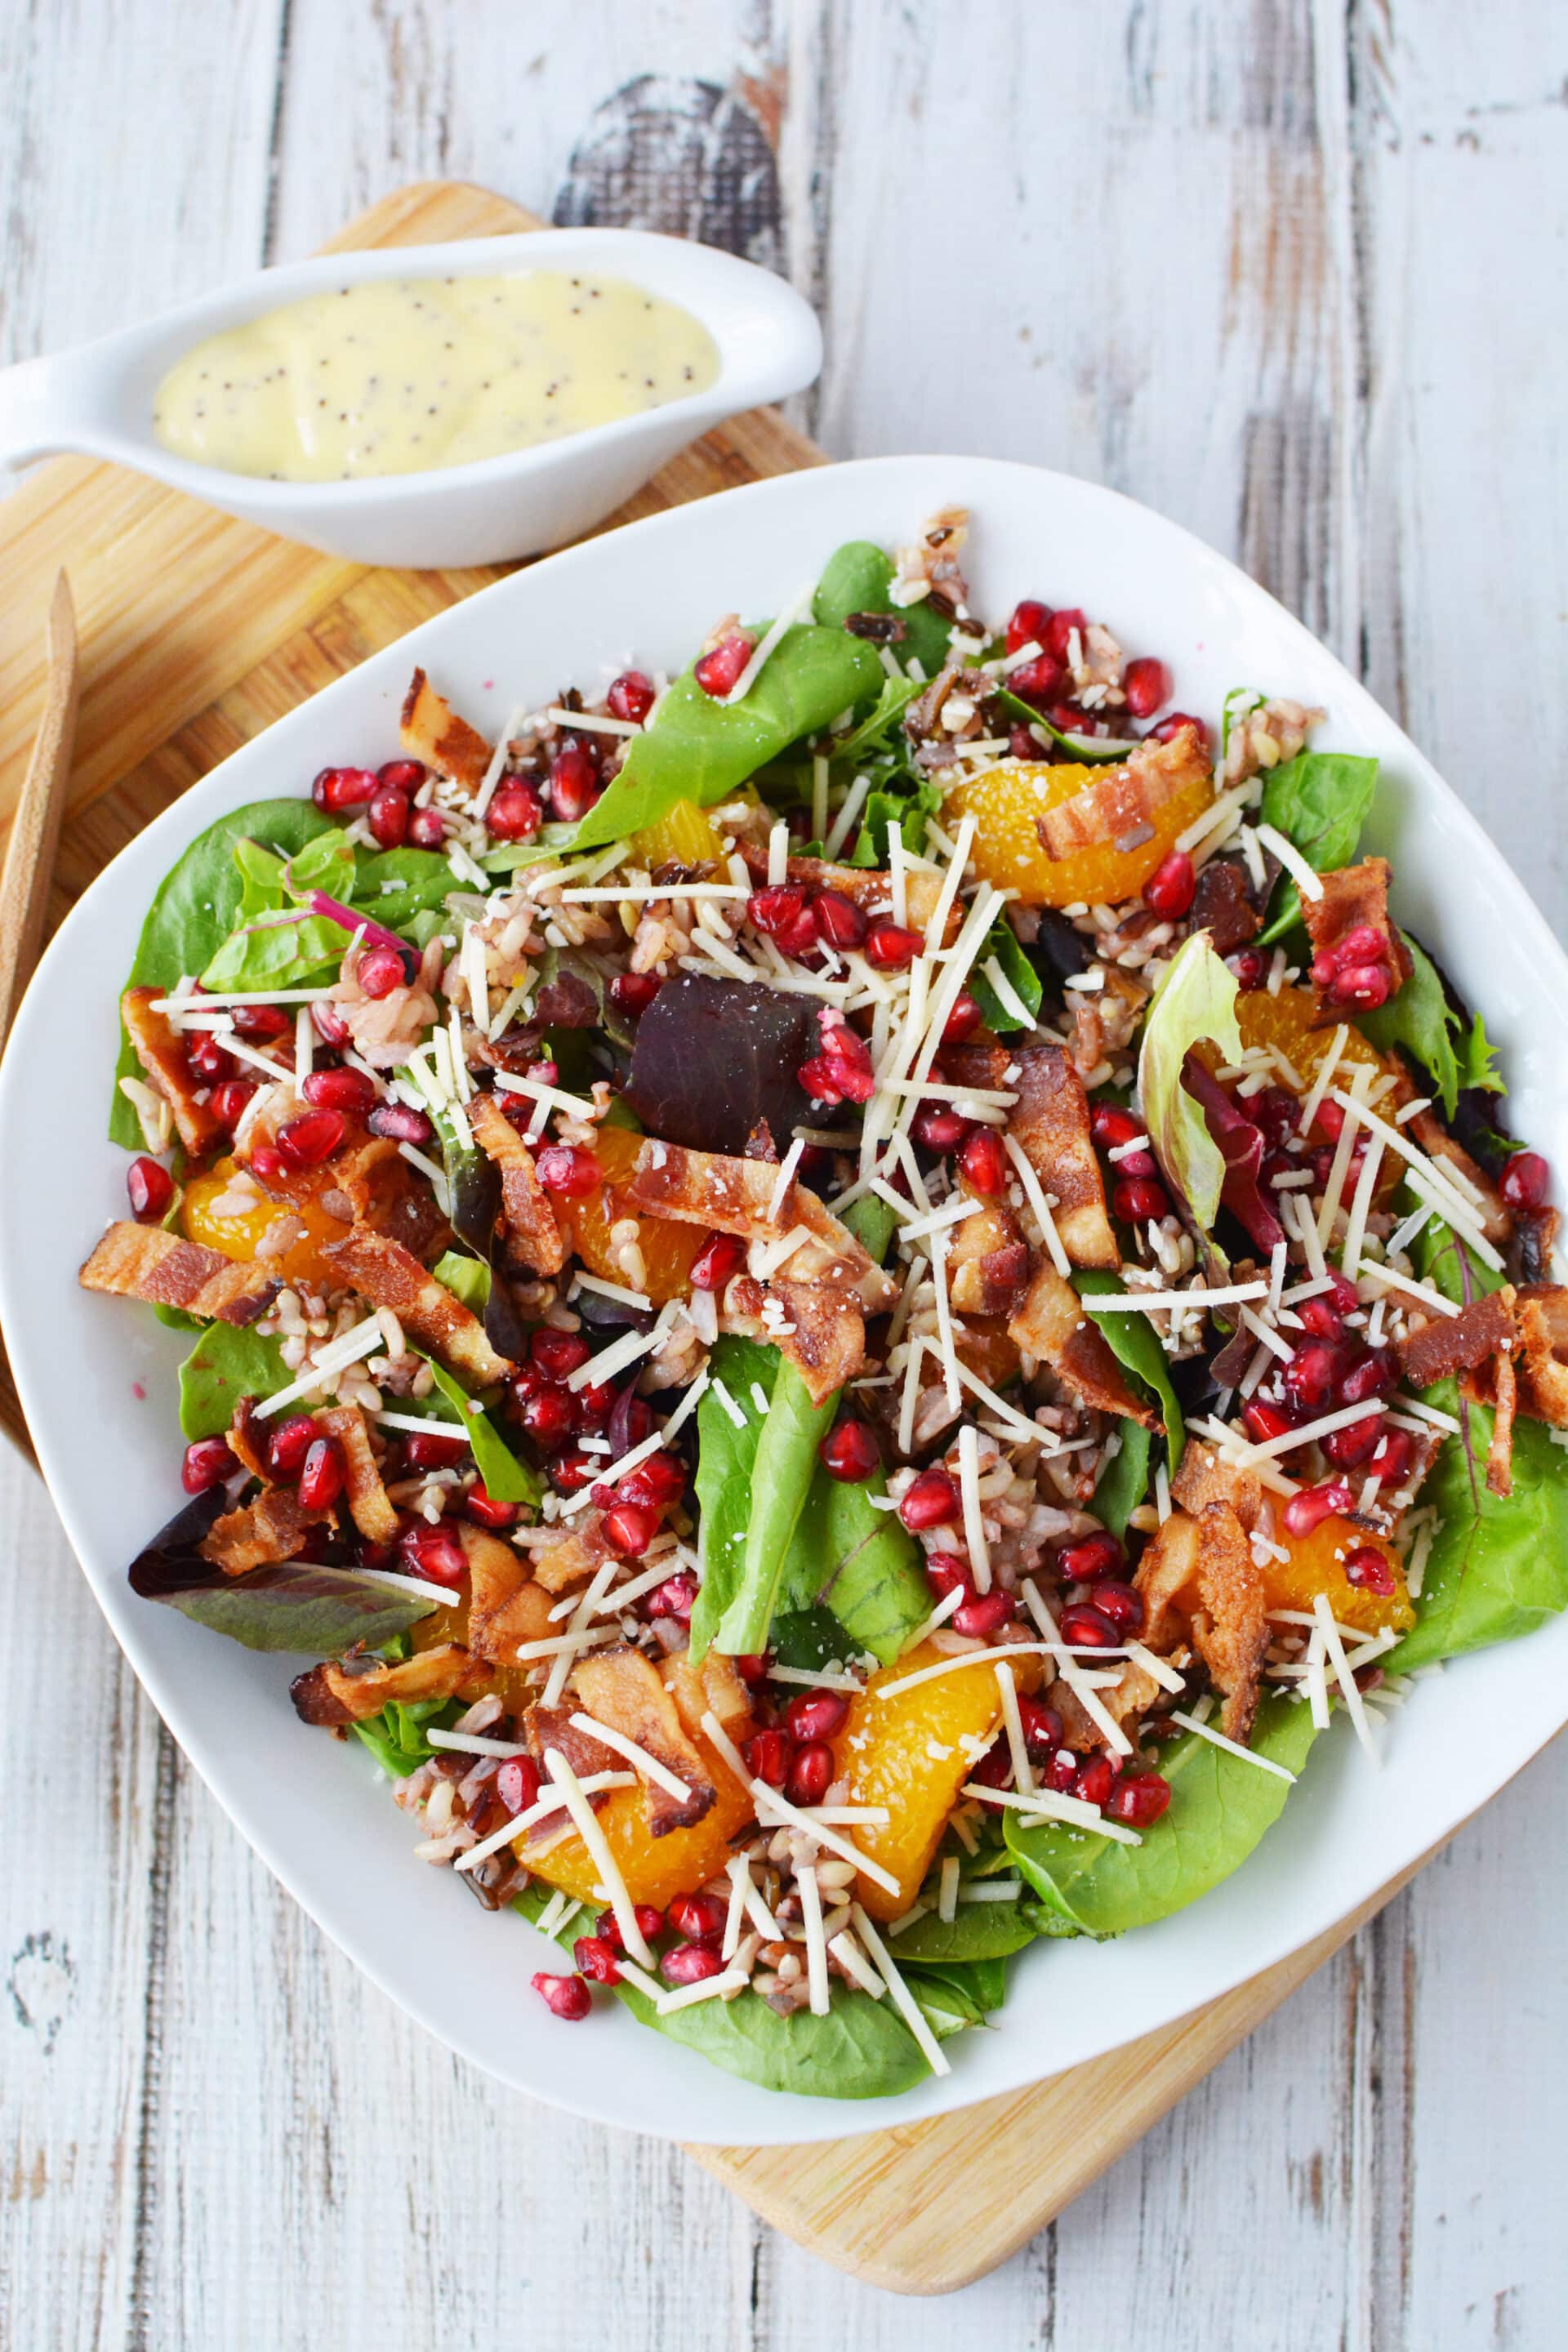 Hearty Winter Salad Recipe - With Pomegranate And Wild Rice - Lady and ...